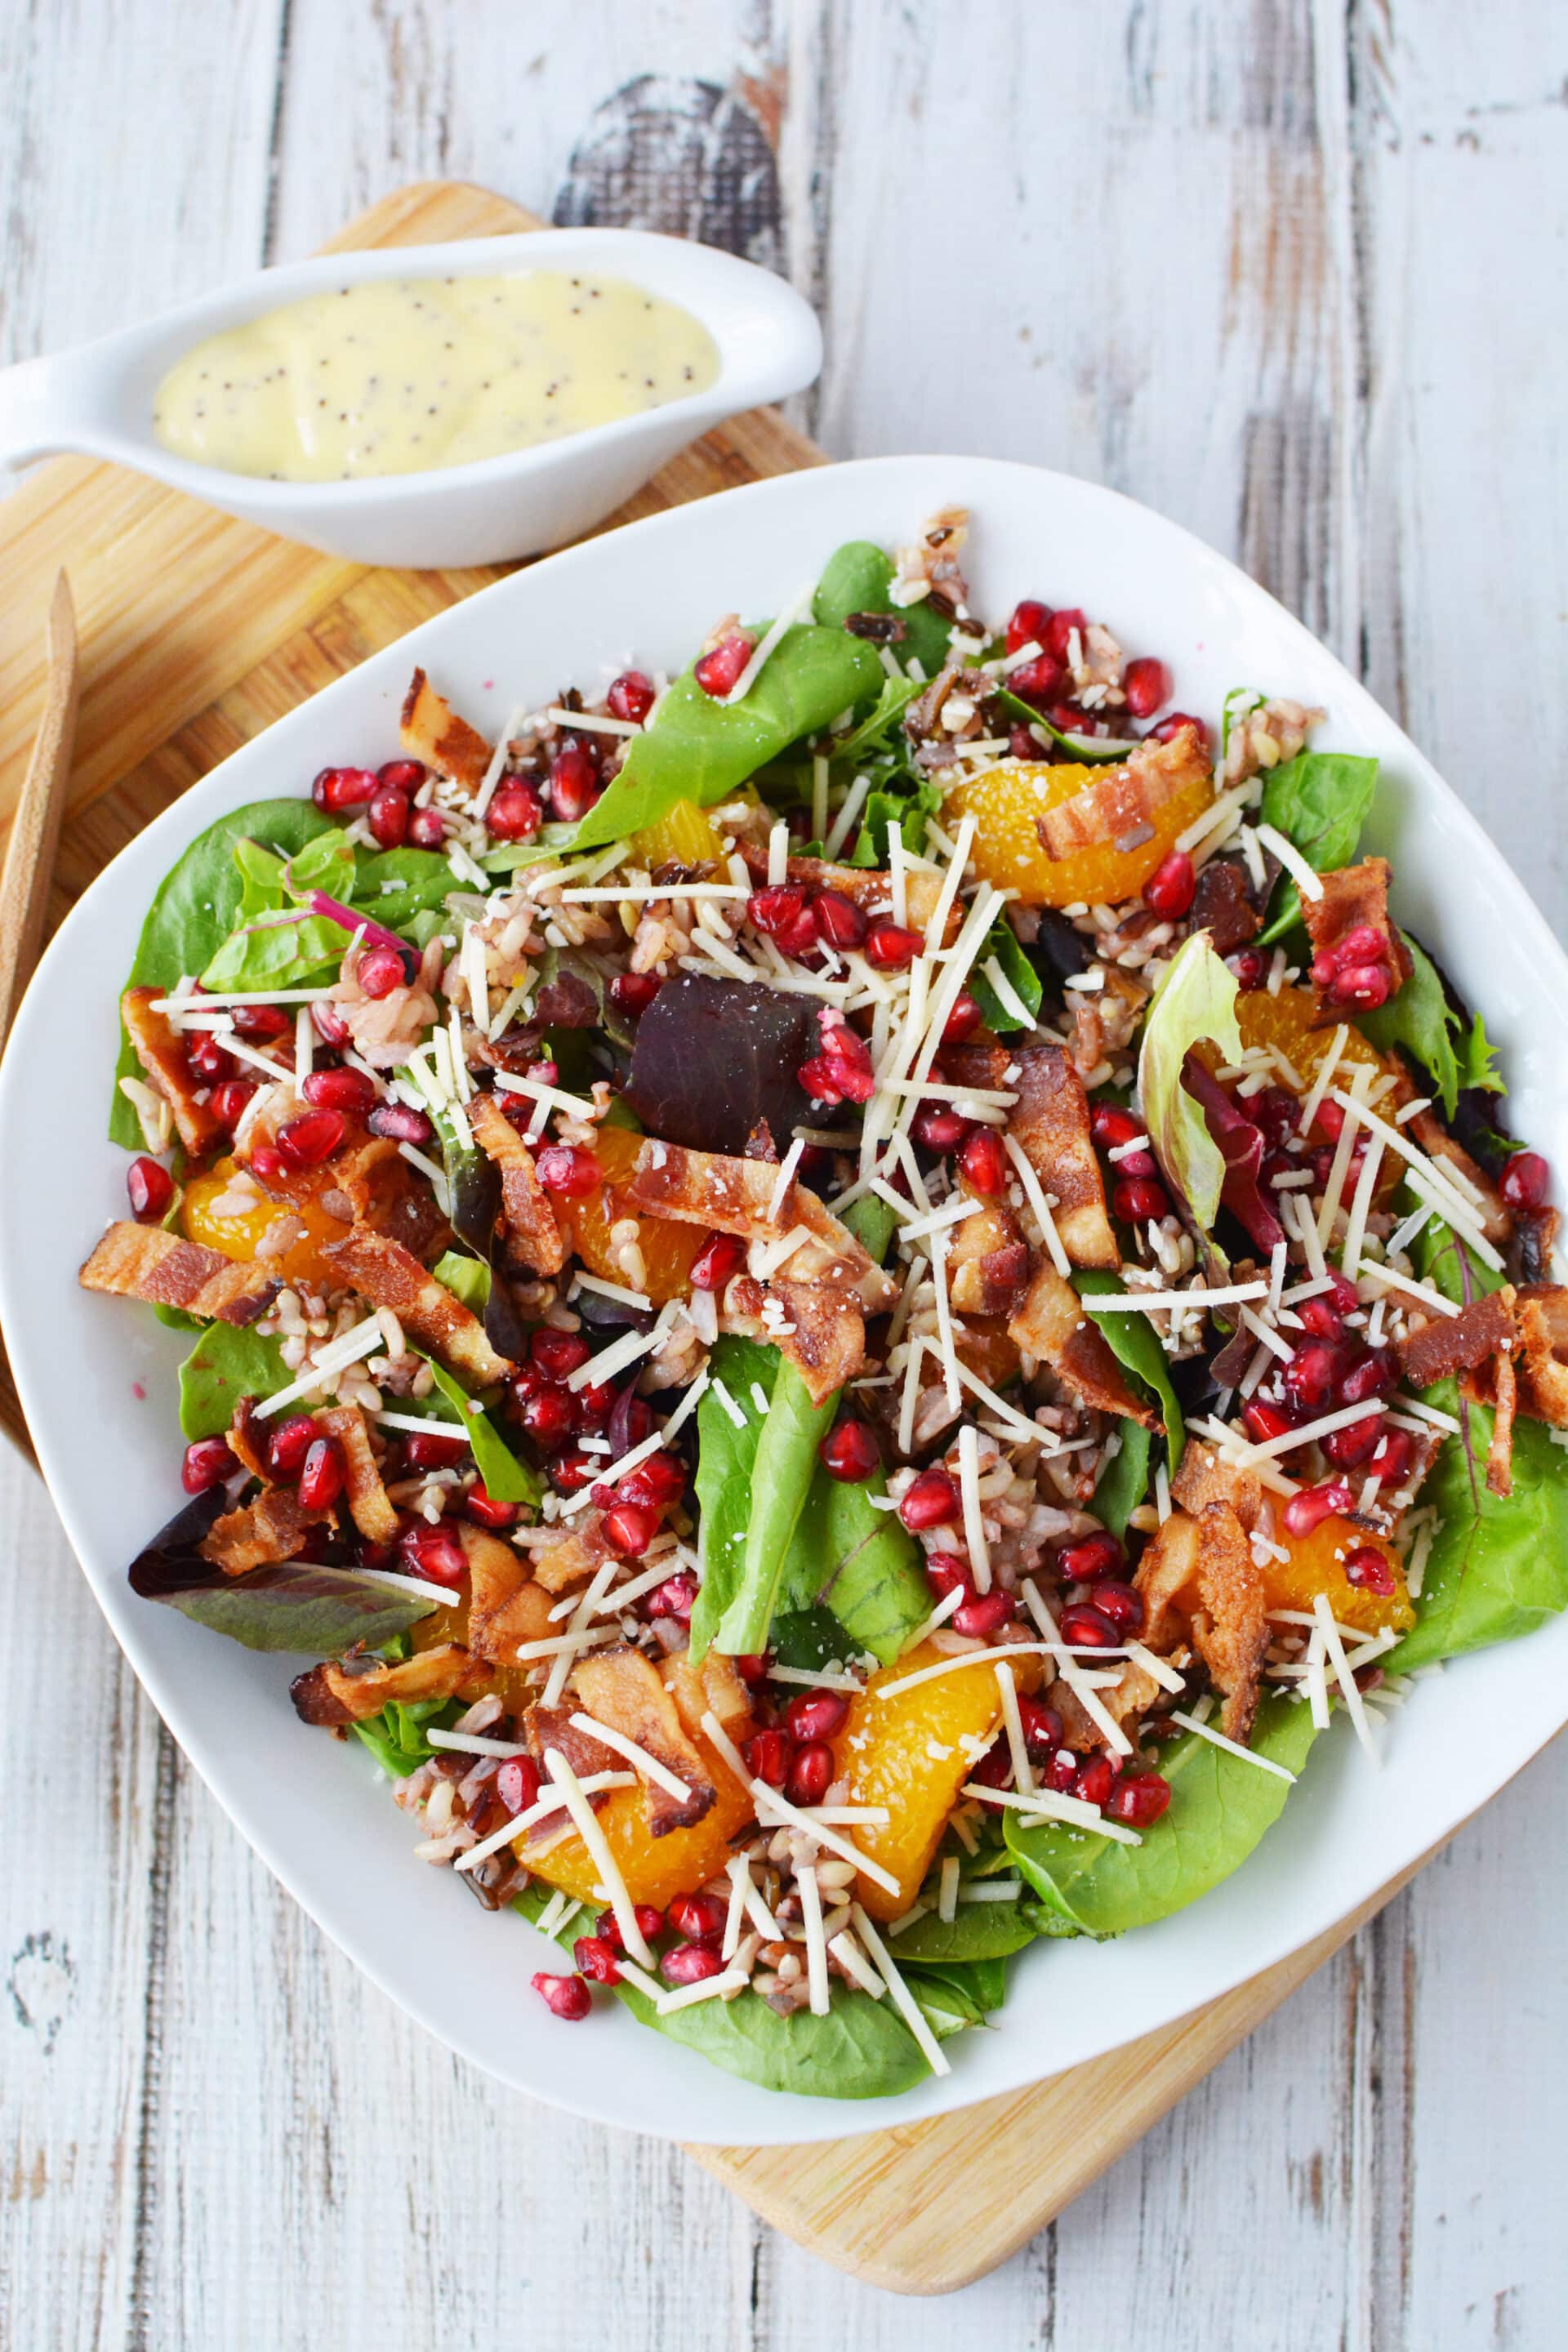 Hearty Winter Salad Recipe - With Pomegranate And Wild Rice - Lady and ...